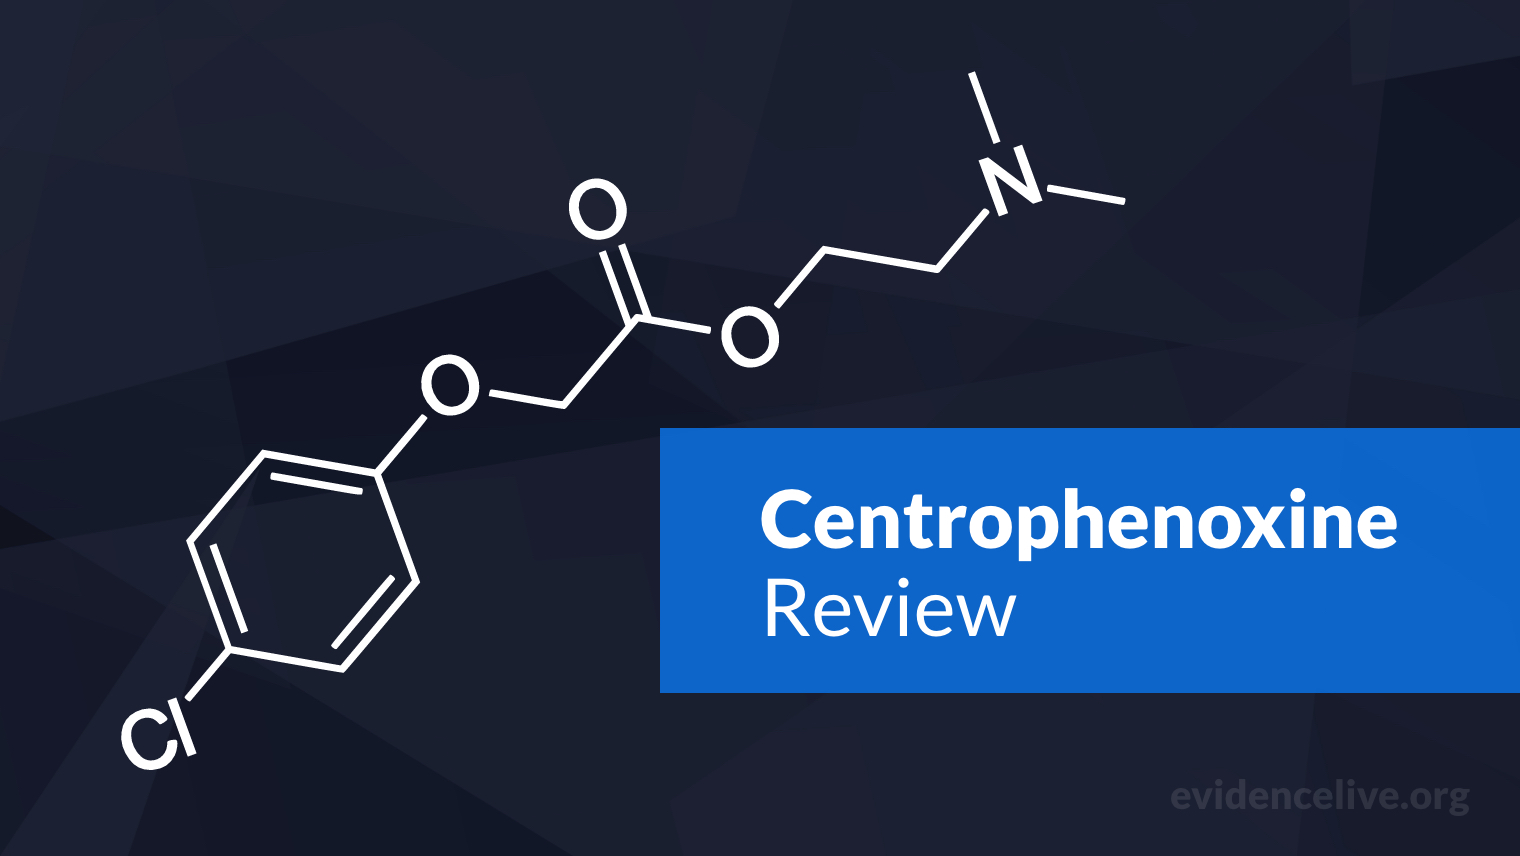 Centrophenoxine Review: Benefits, Dosage, and Side Effects